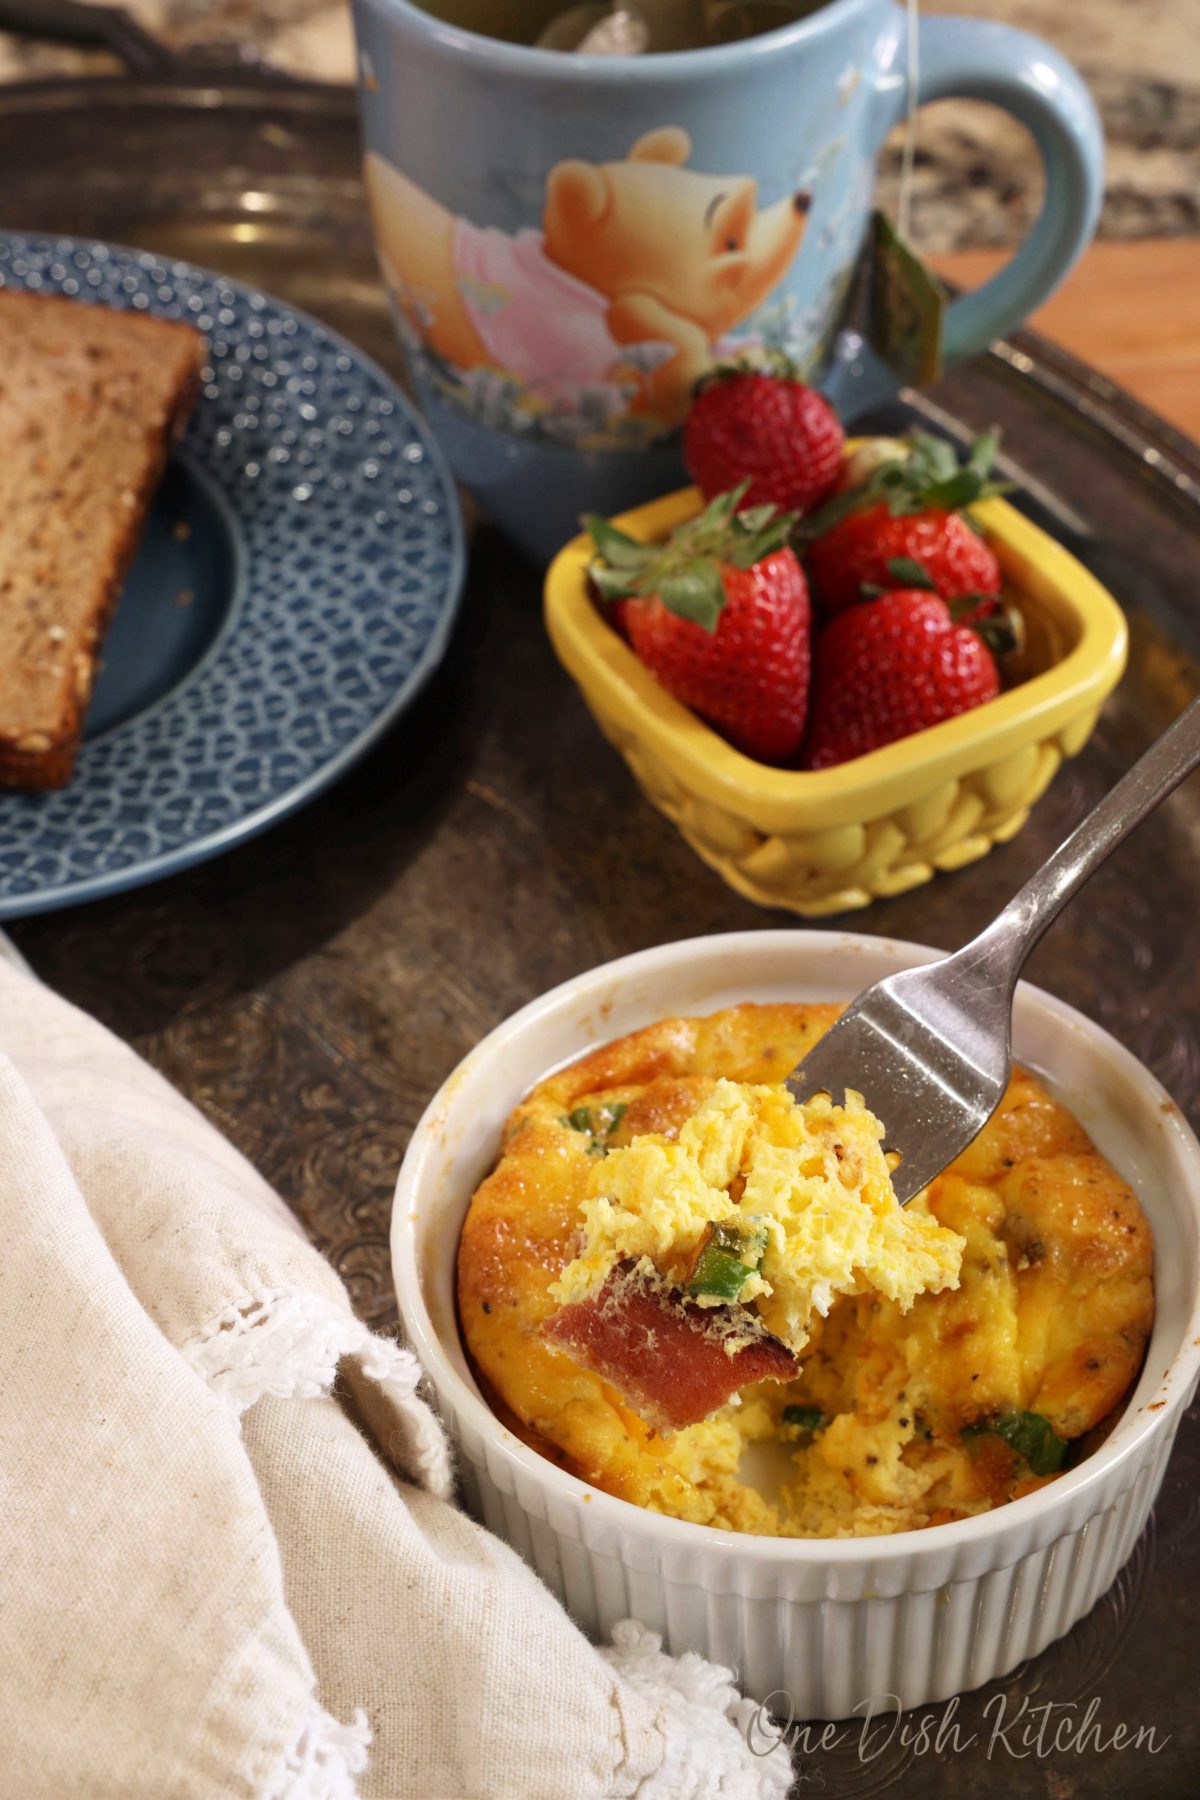 a fork filled with eggs and bacon above a ramekin with baked eggs inside it and next to a bowl of strawberries and a cup of tea.